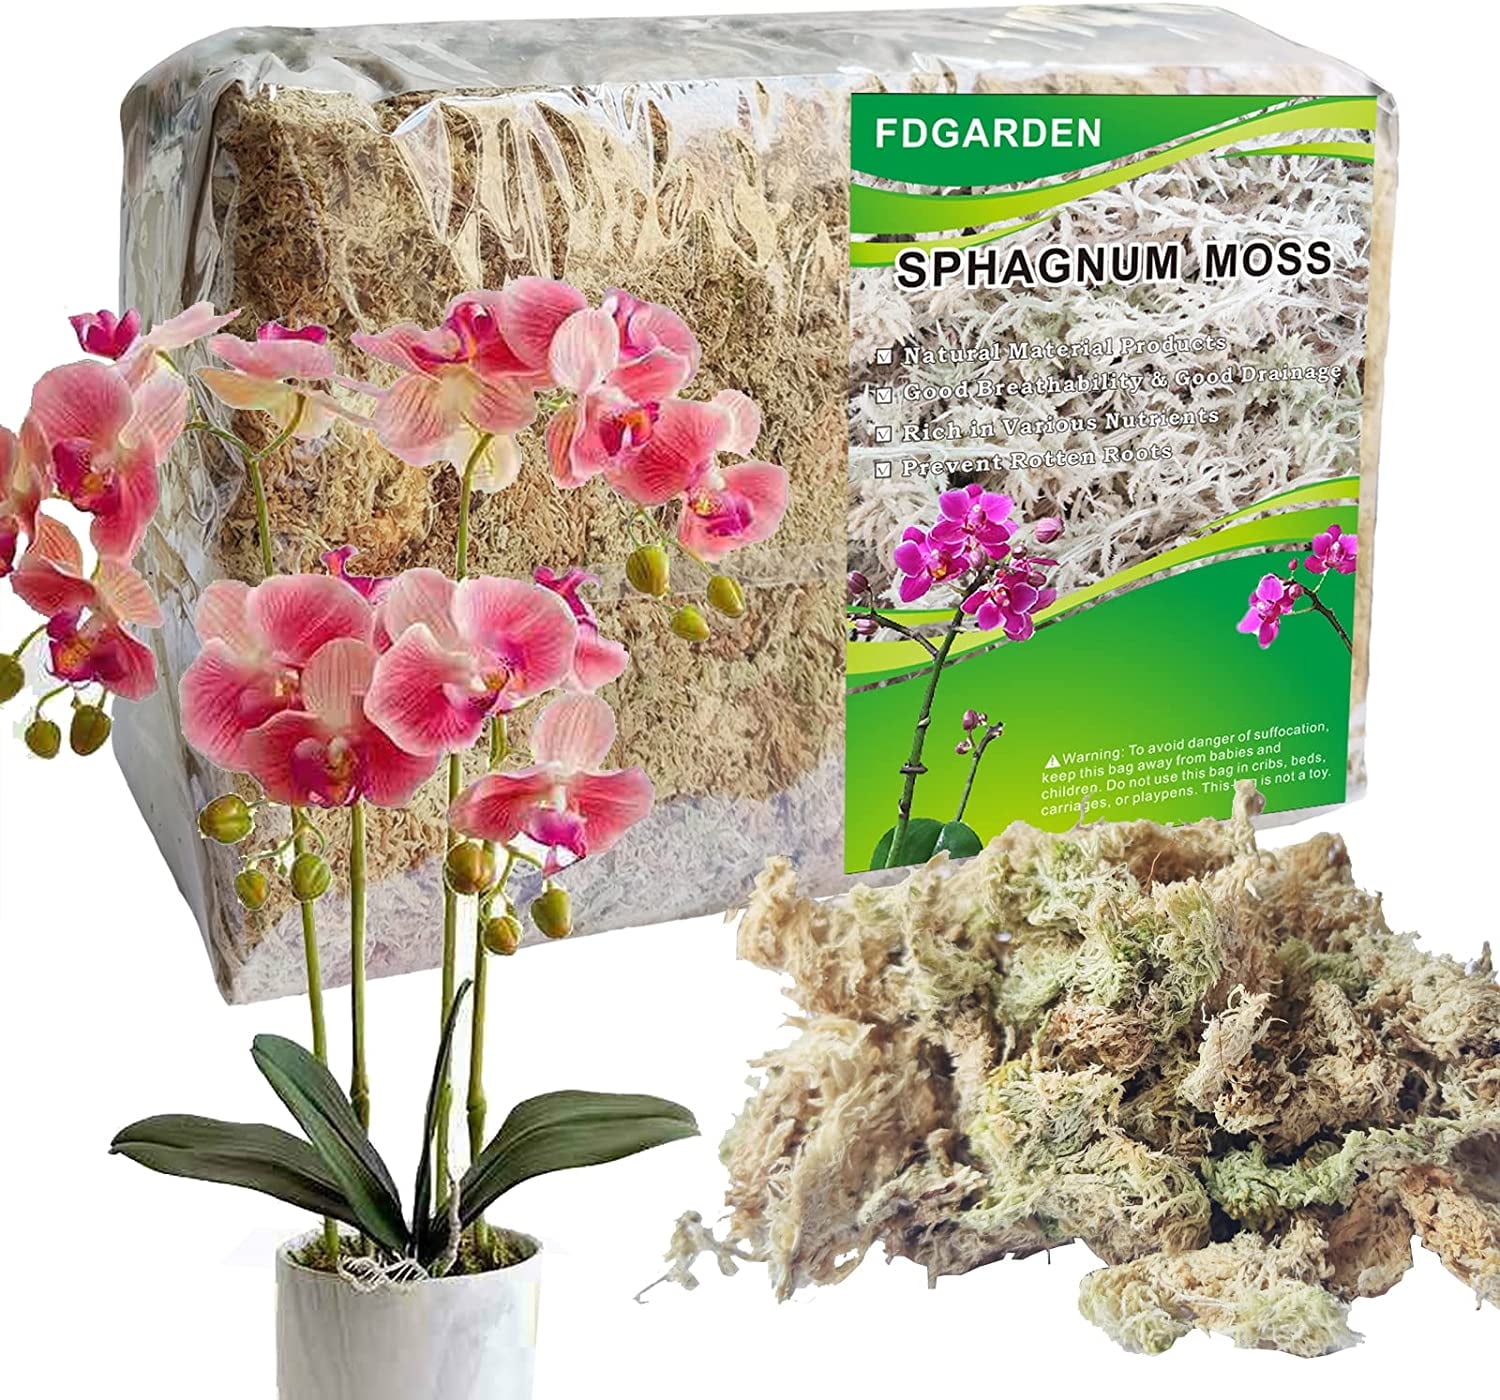  Natural Sphagnum Moss for Plants - Orchid Potting Mix Peat  Moss Carnivorous Dried Bark for Sarracenia, Gardening Succulents Reptiles  Decorating Terrariums Potted Propagation (10QT) : Patio, Lawn & Garden